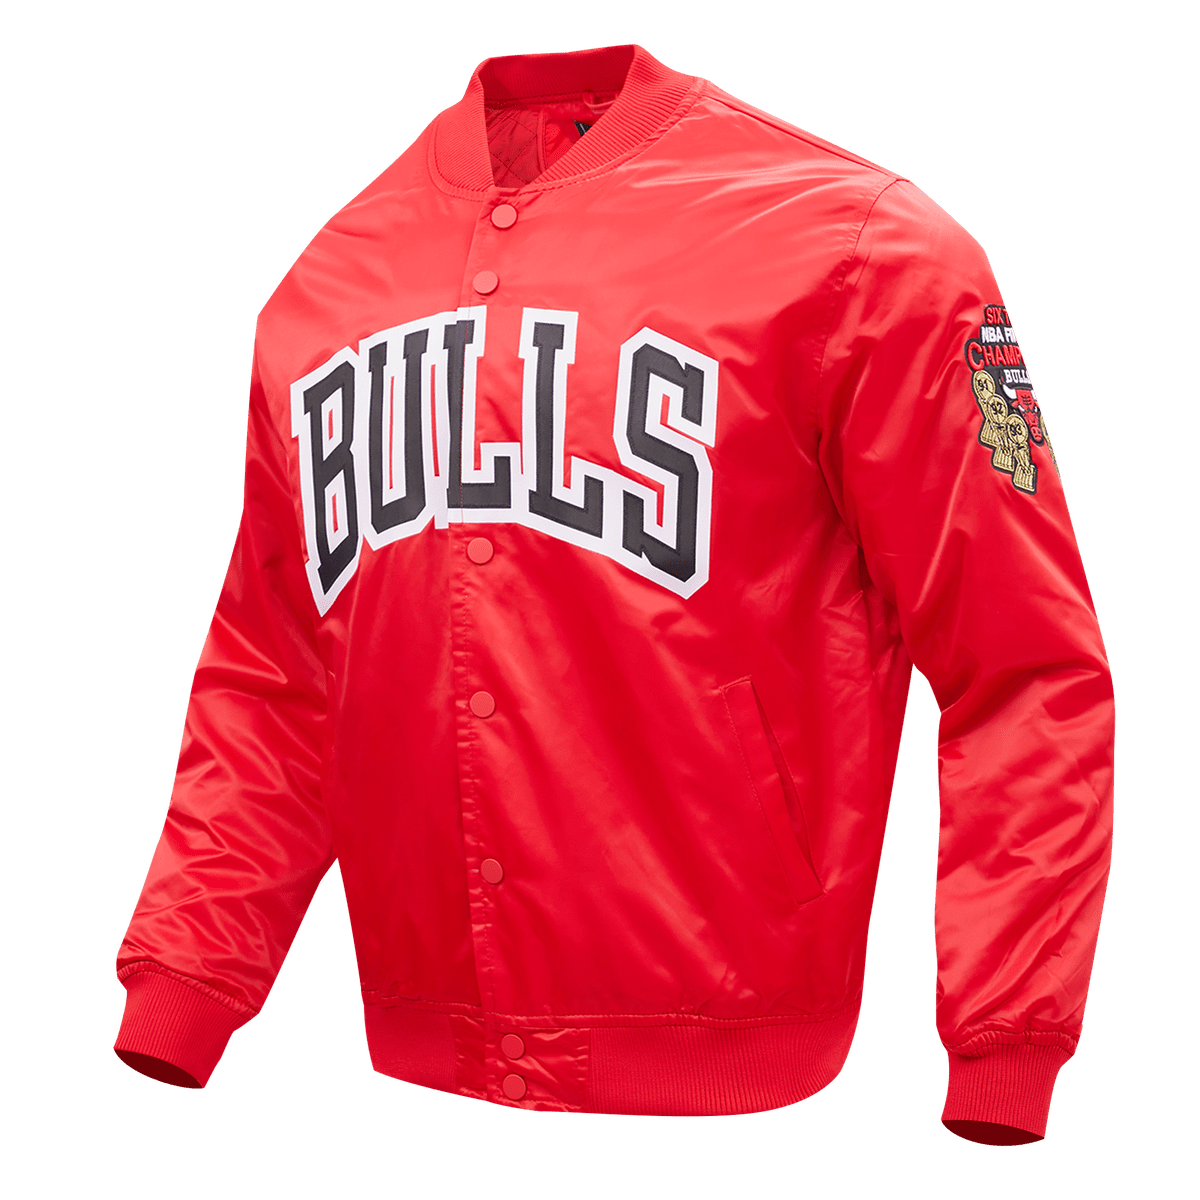 White and Red Chicago Bulls NBA Satin Jacket